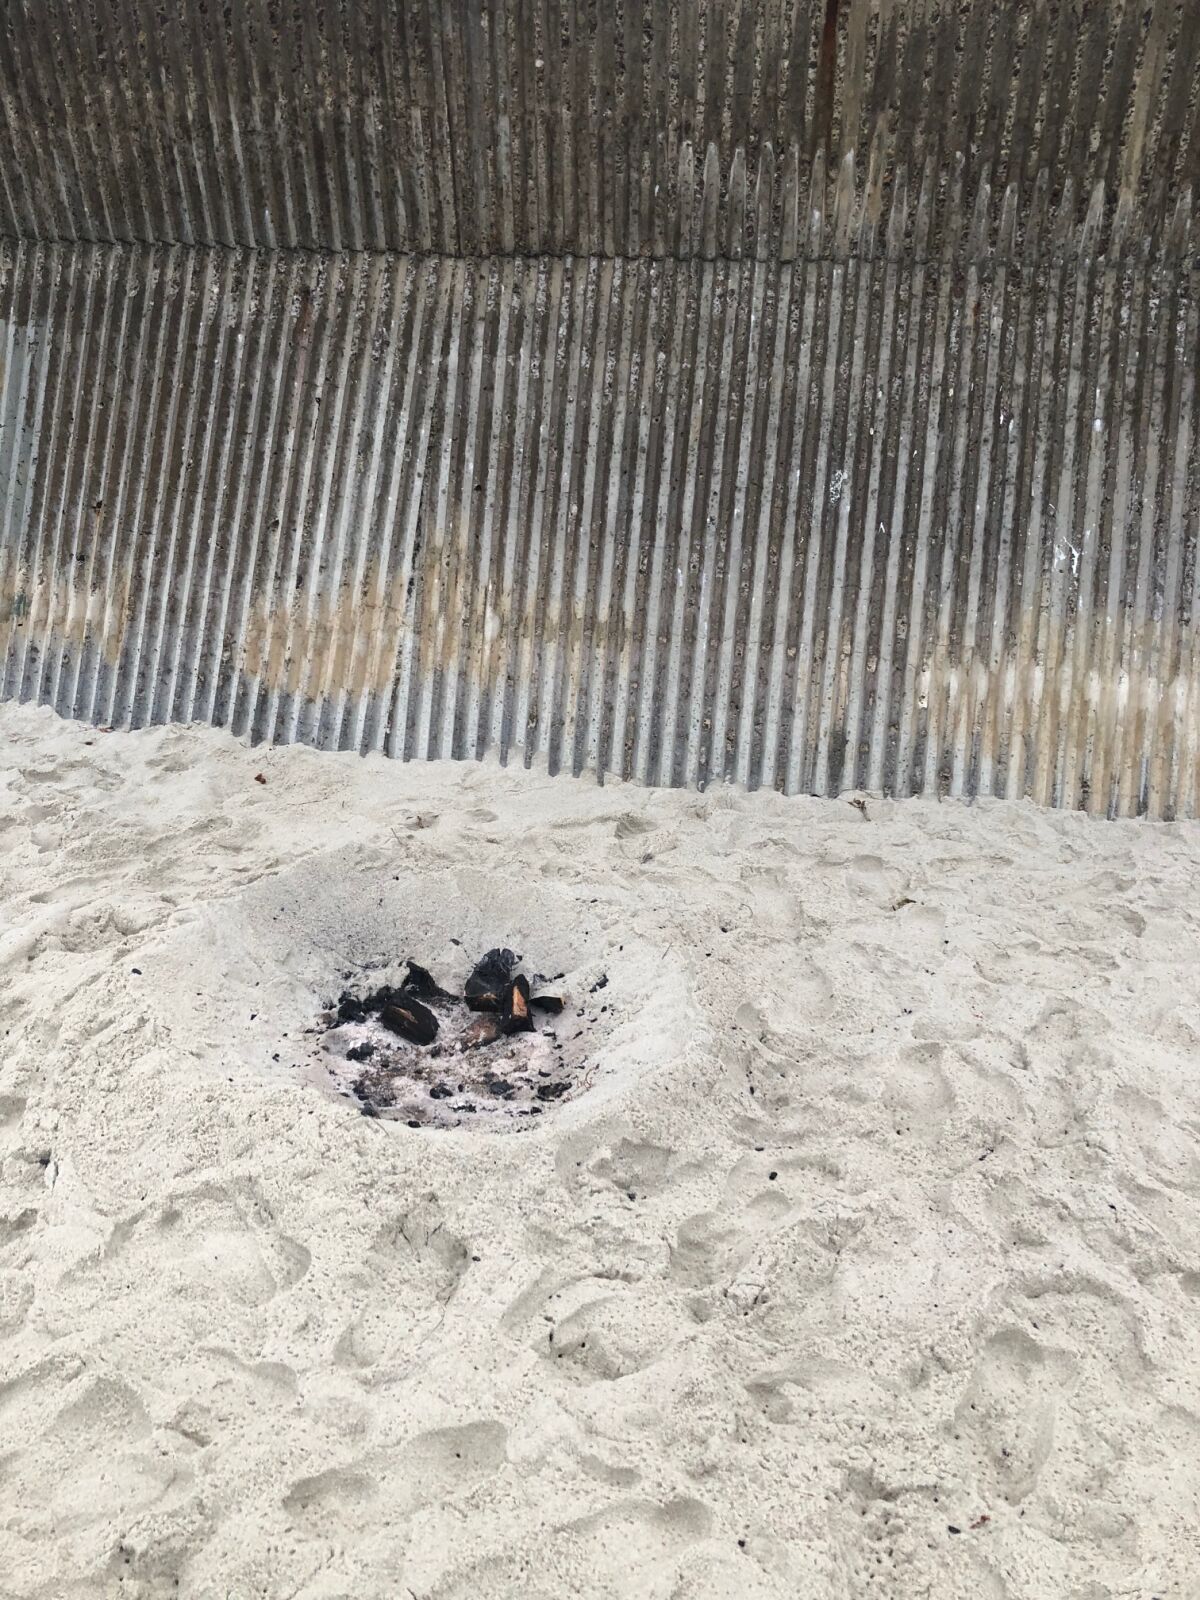 Burnt coals are pictured in the sand at Marine Street Beach.